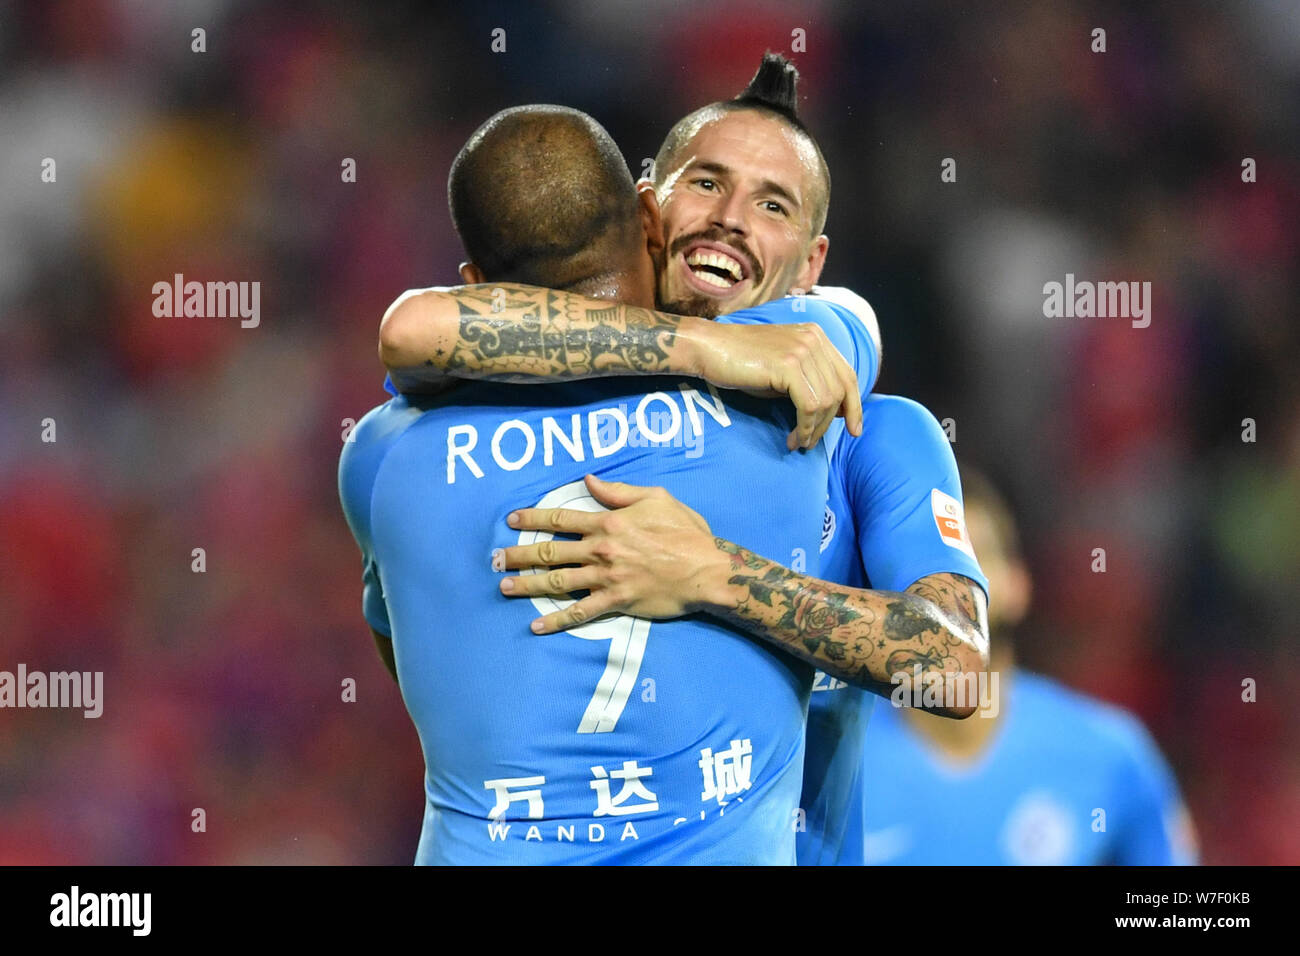 Venezuelan football player Salomon Rondon, left, of Dalian Yifang  celebrates with Slovak football player Marek Hamsik after scoring against  Chongqing SWM in their 21st round match during the 2019 Chinese Football  Association